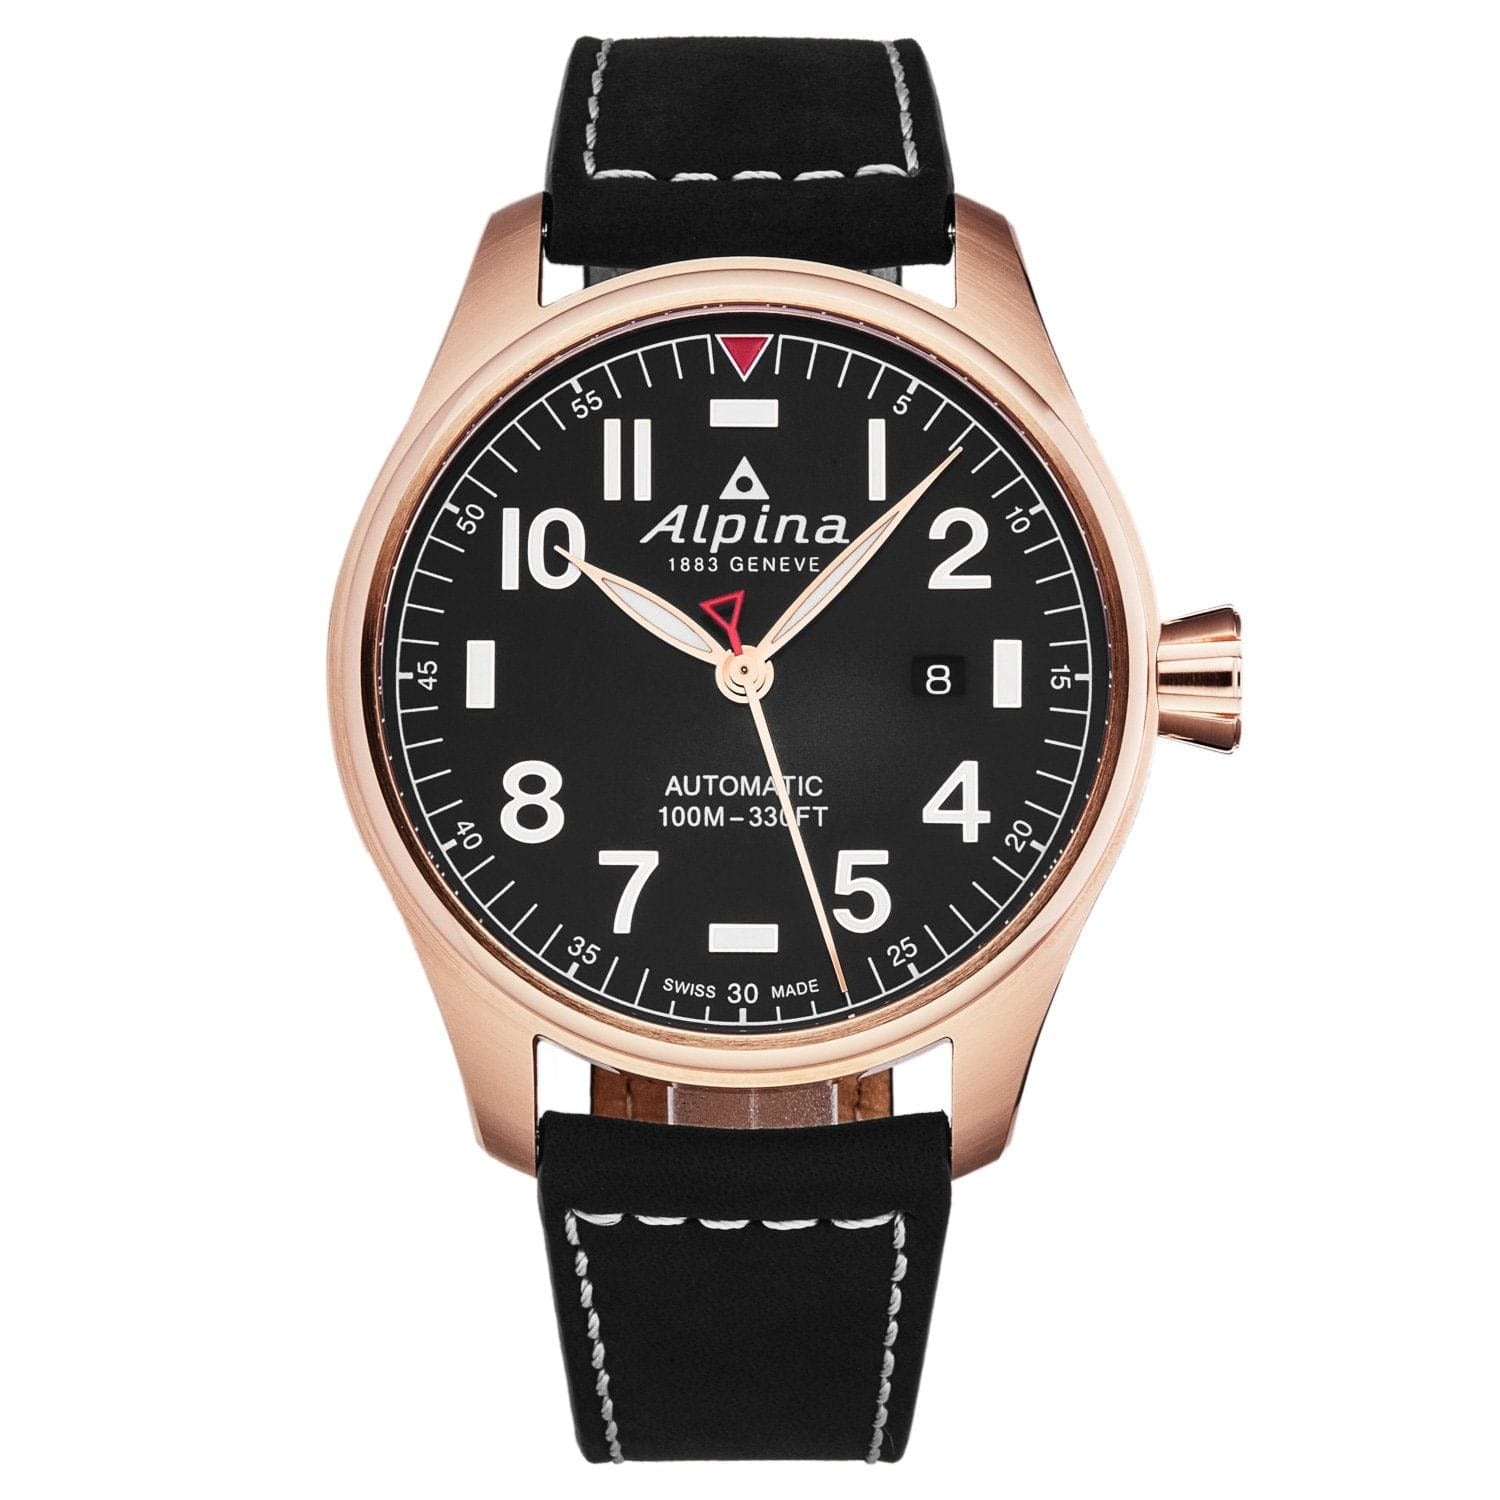 Alpina Men's AL525NN4S4 'Startimer Pilot' Black Dial Black Leather Strap Automatic Watch in rose gold with black leather strap.